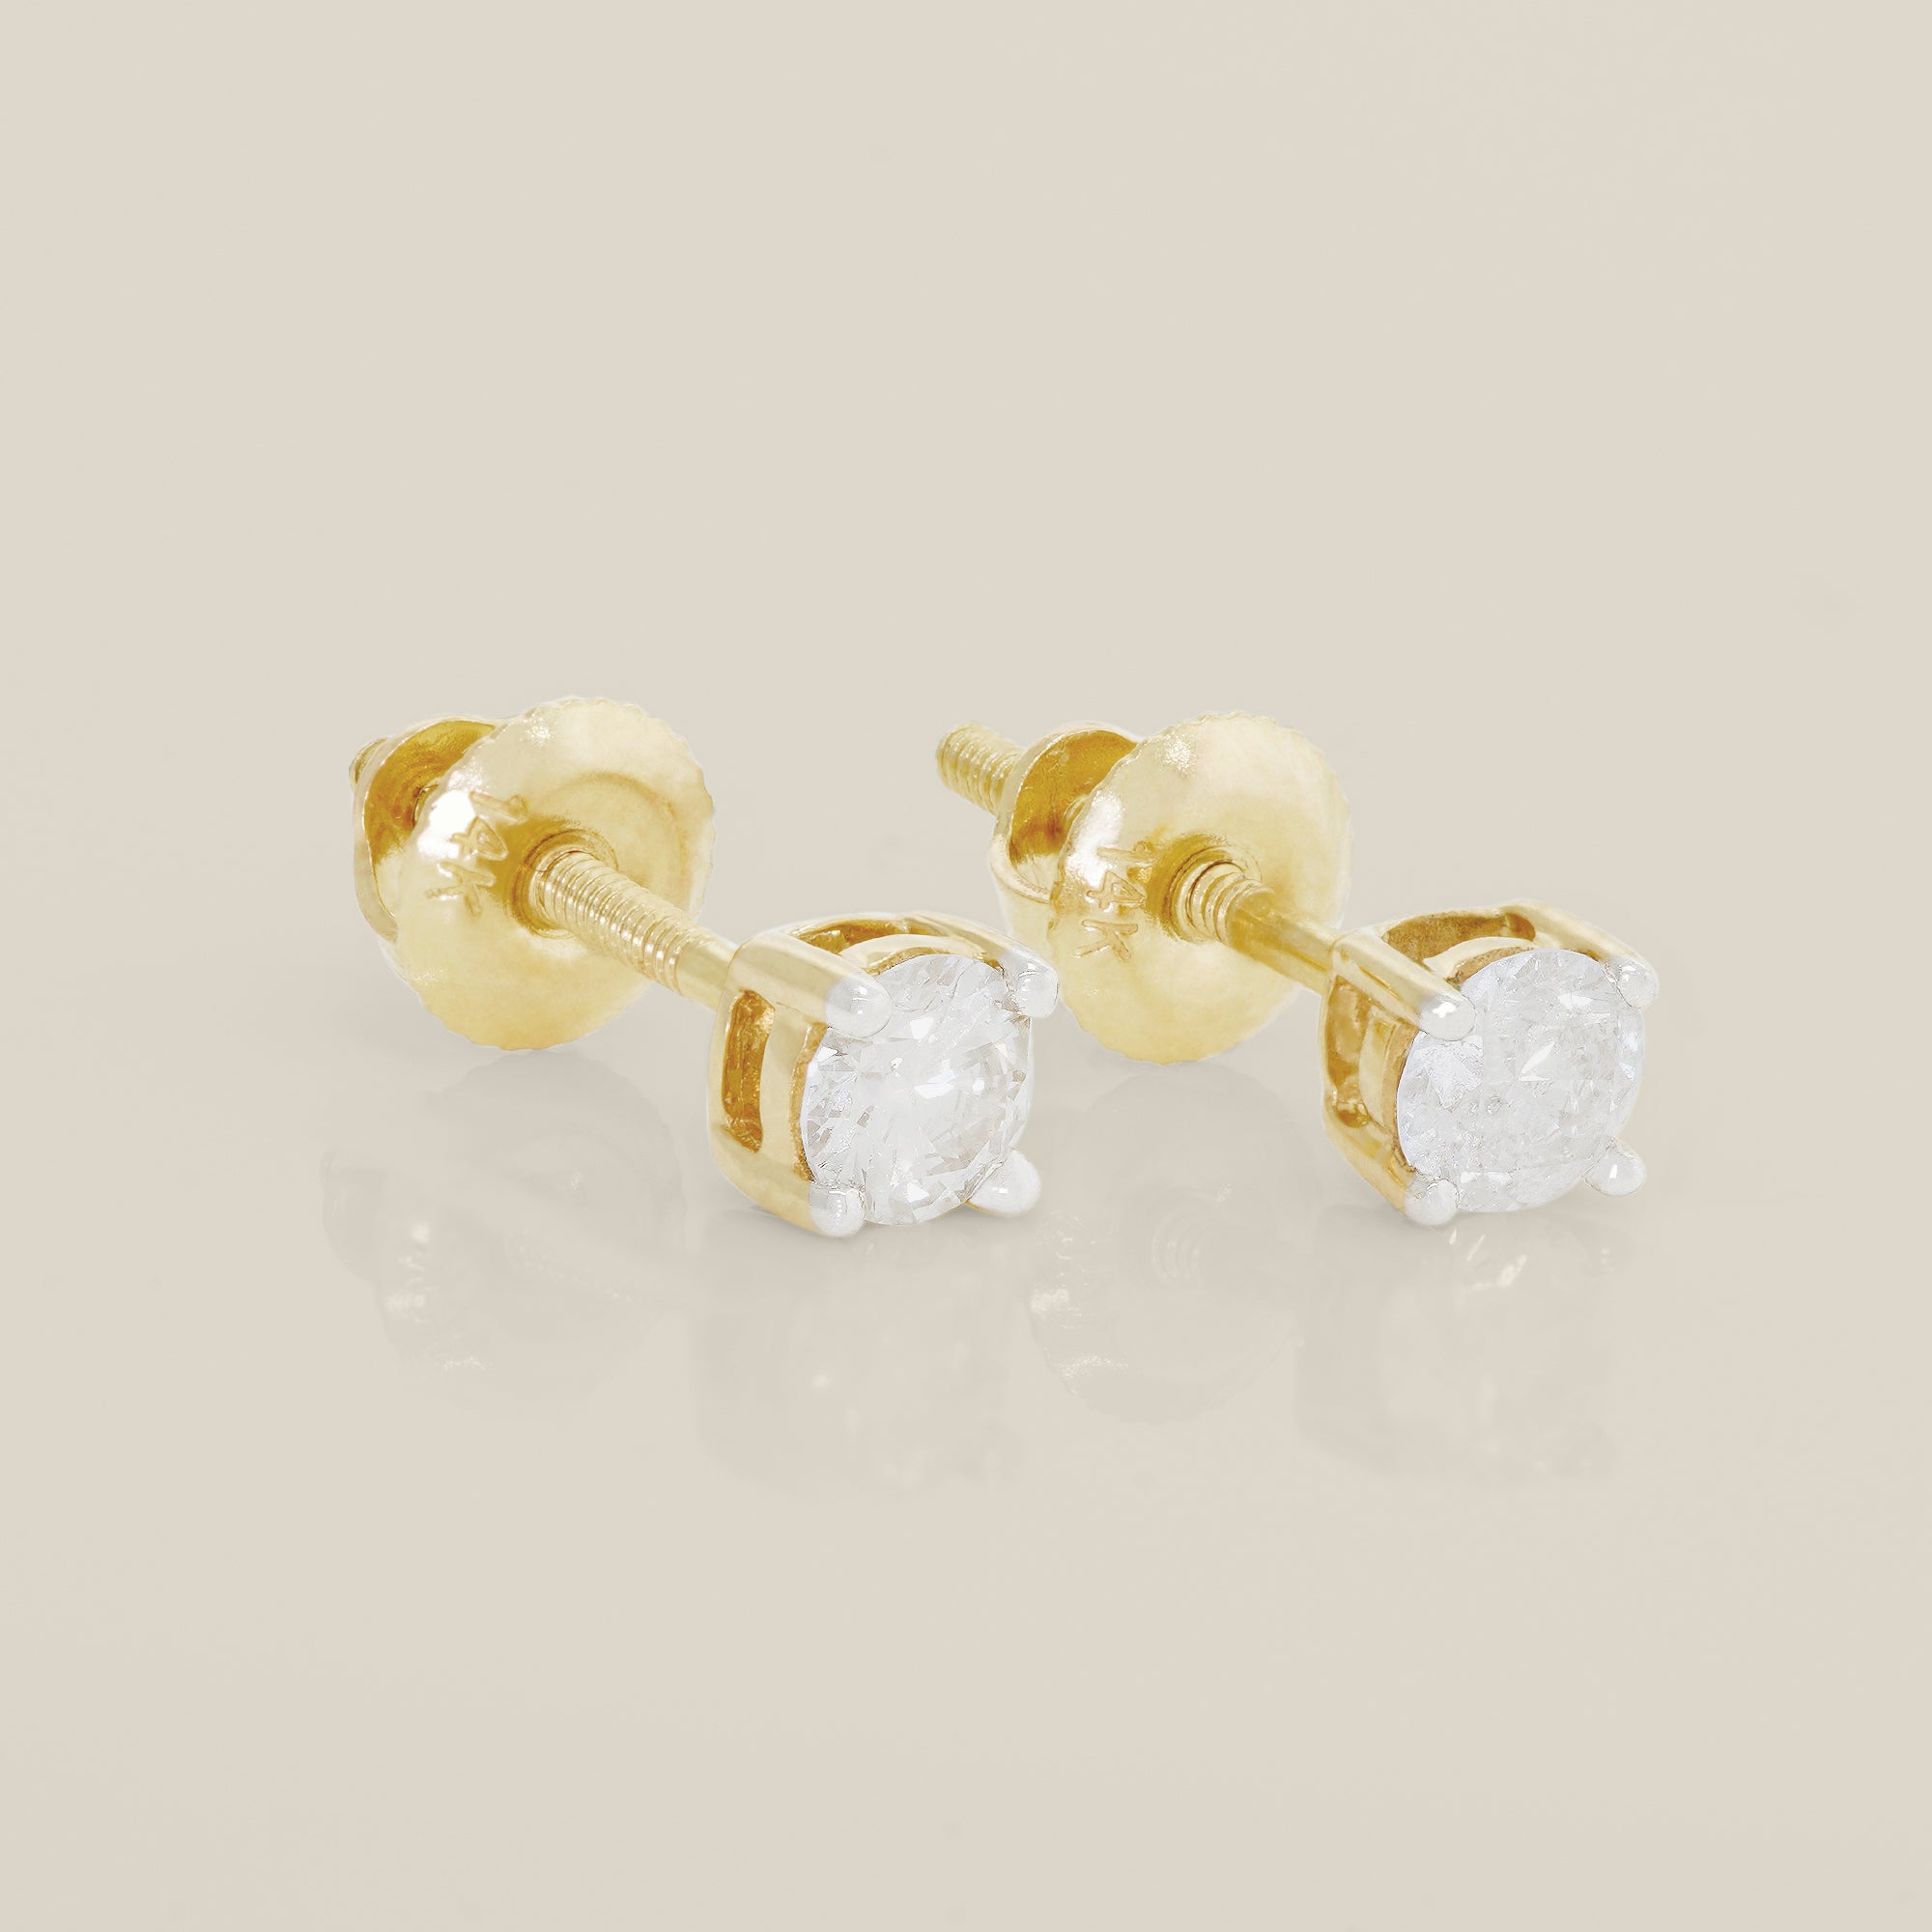 14K Solid Gold Prong Solitaire Diamond Stud Earrings